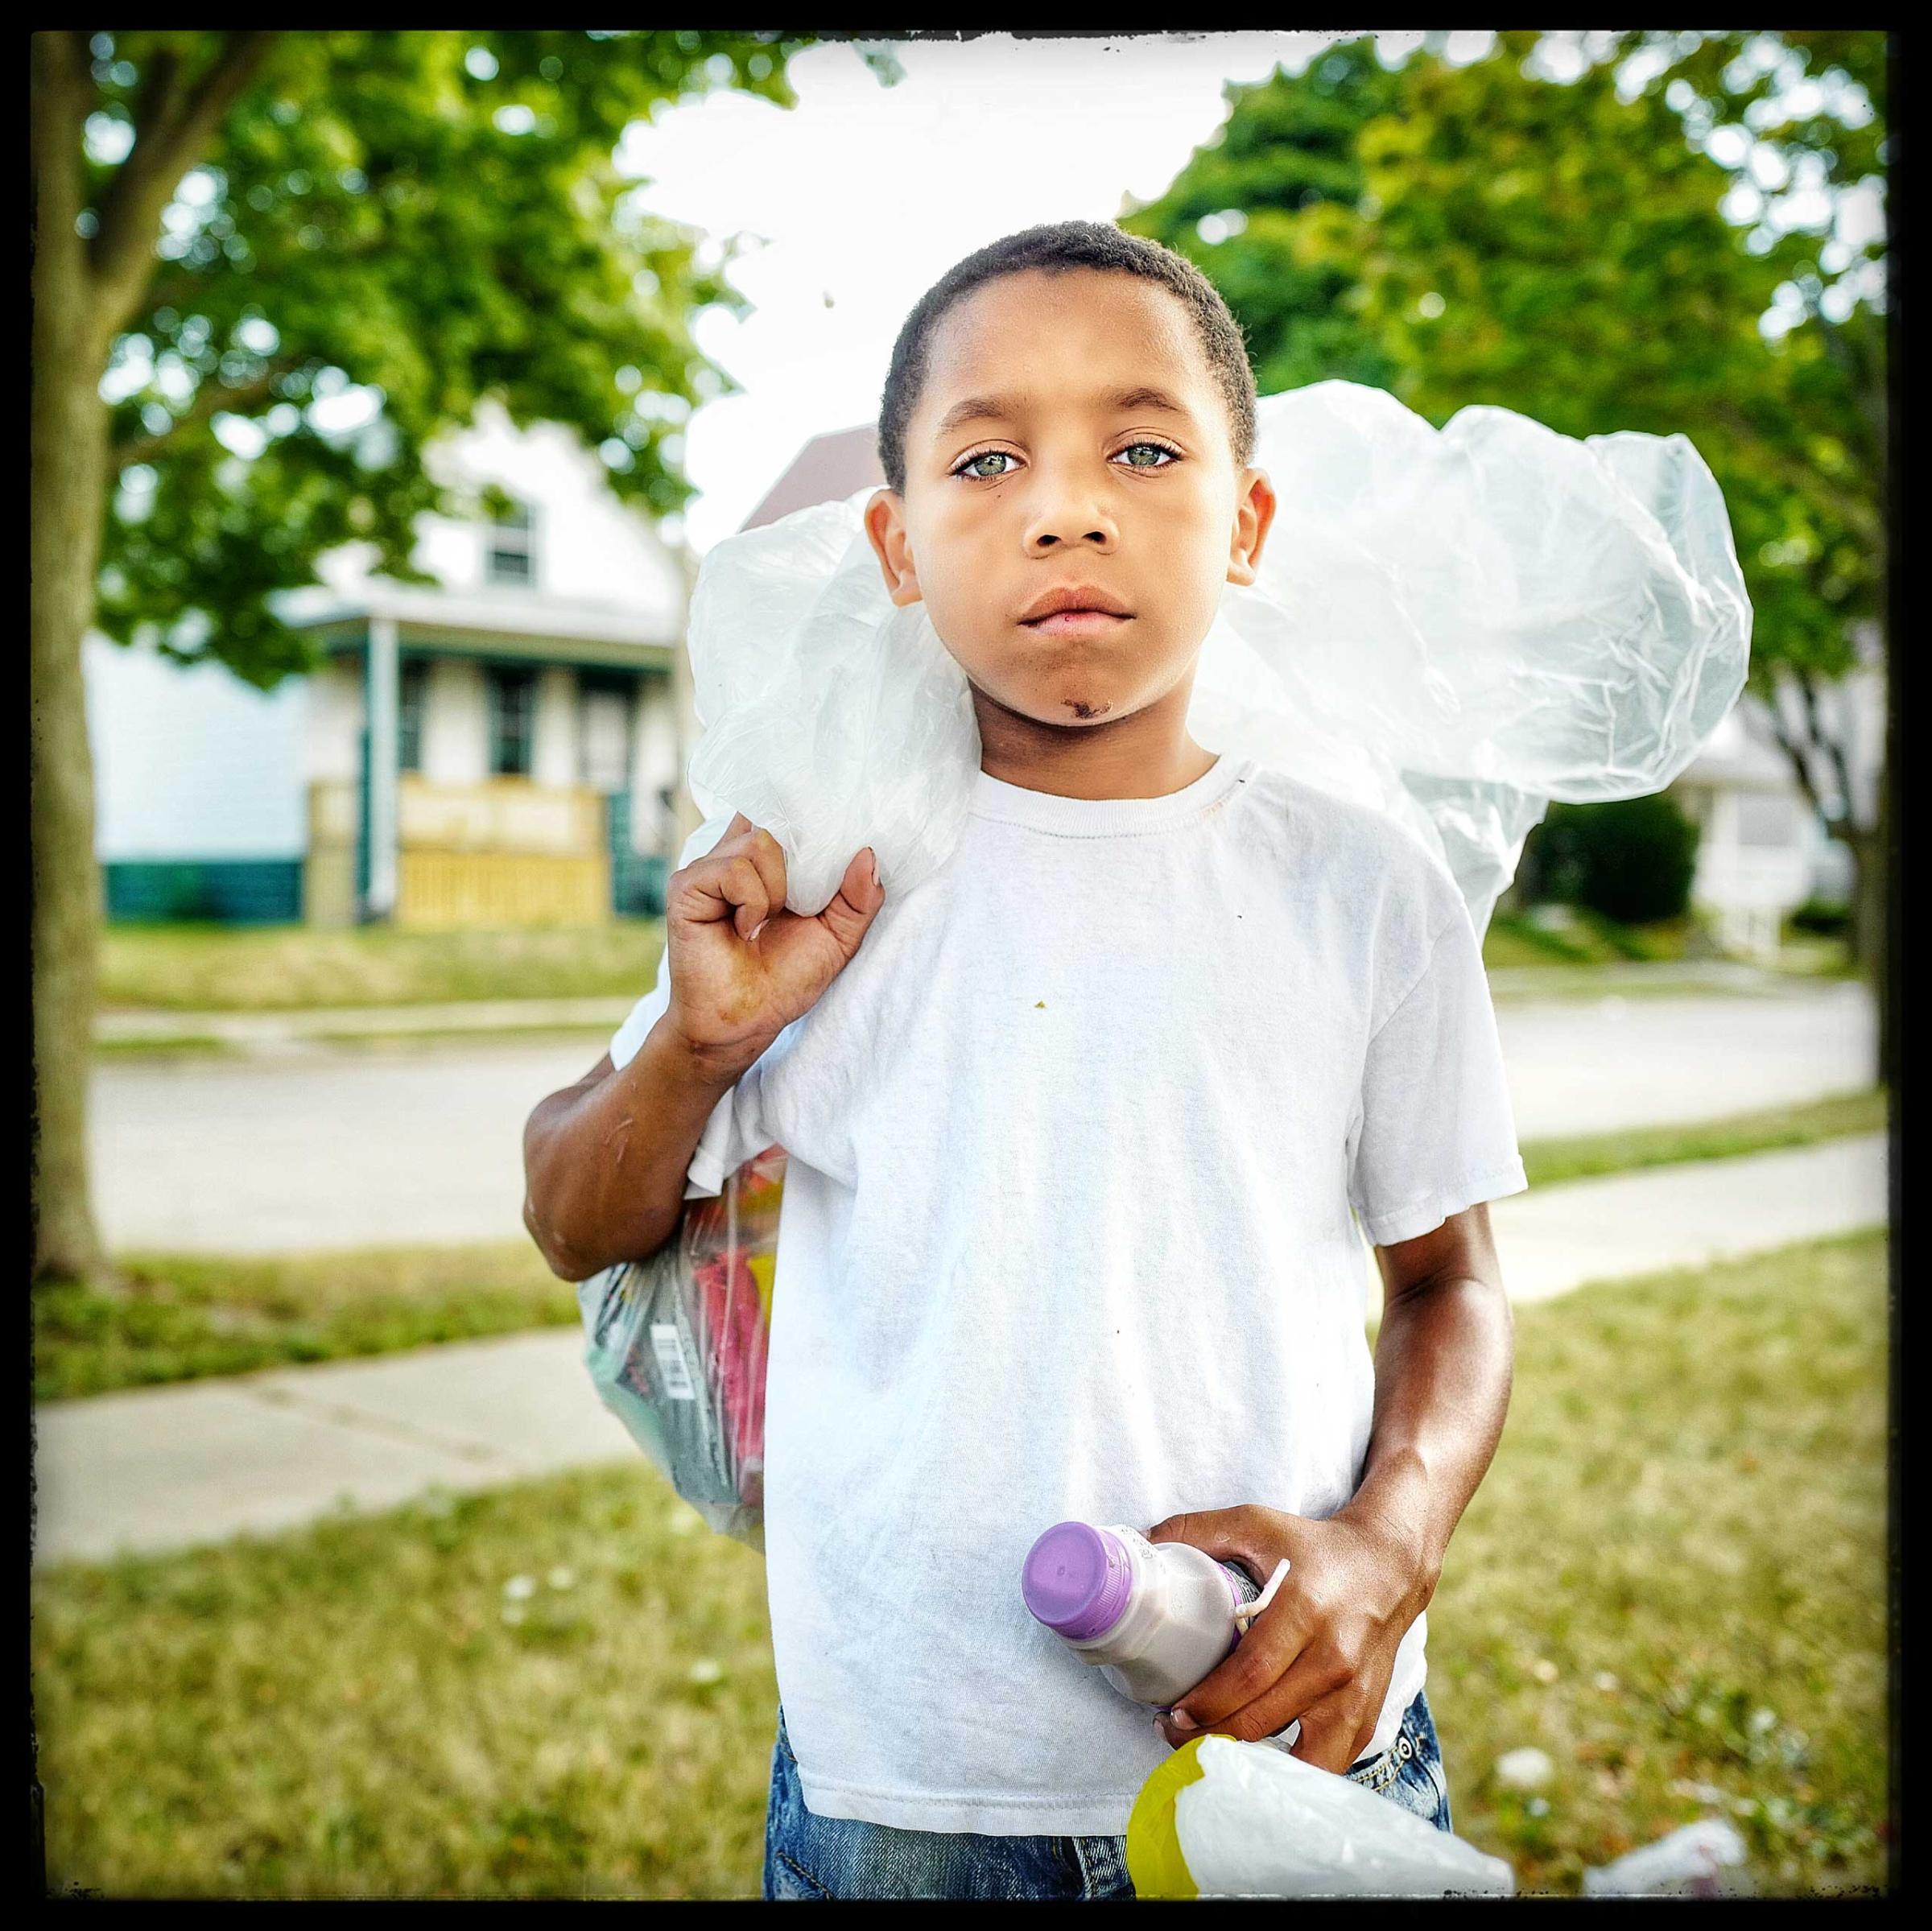 10 year old Darian after stopping at a Salvation army truck where he was given a ham sandwich, some fruits and a bottle of milk. Residents of the zipcode 53205 in Milwaukee often meet the truck around 1 pm where they are given a meal.